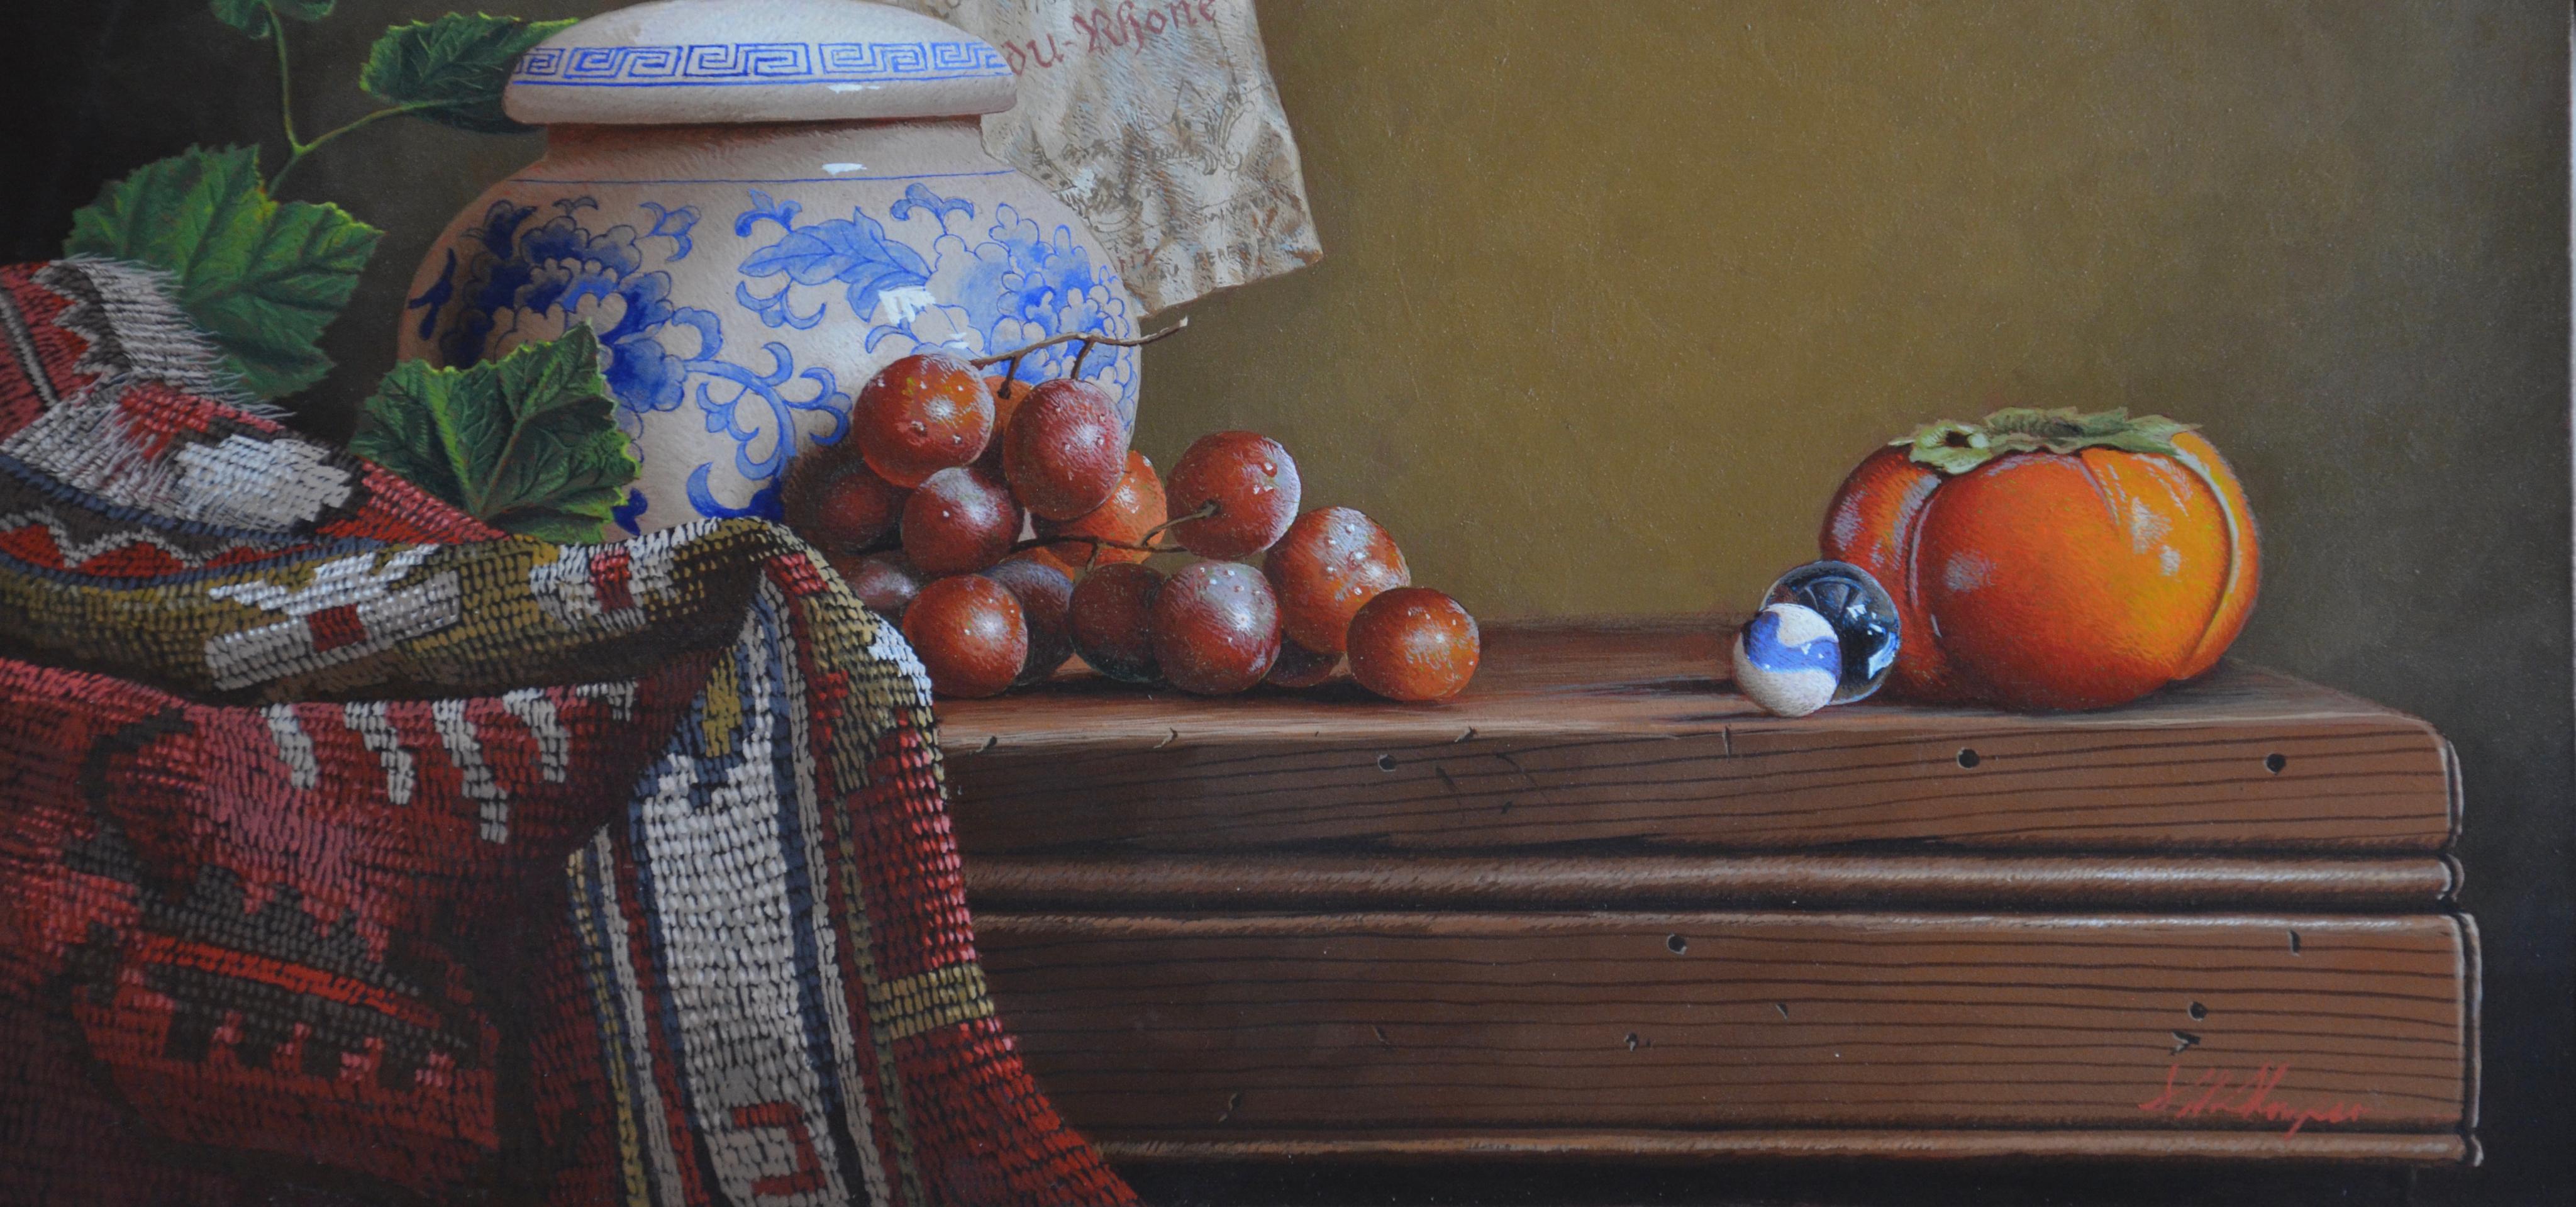  Persimmon with Blue Marble is painted with  egg tempera  by realist painter Mark Thompson inches.  Persimmon with Blue Marble Egg tempera is 8.5 x 14 inches and comes with a custom gilded frame. Egg tempera goes back centuries in the art world.